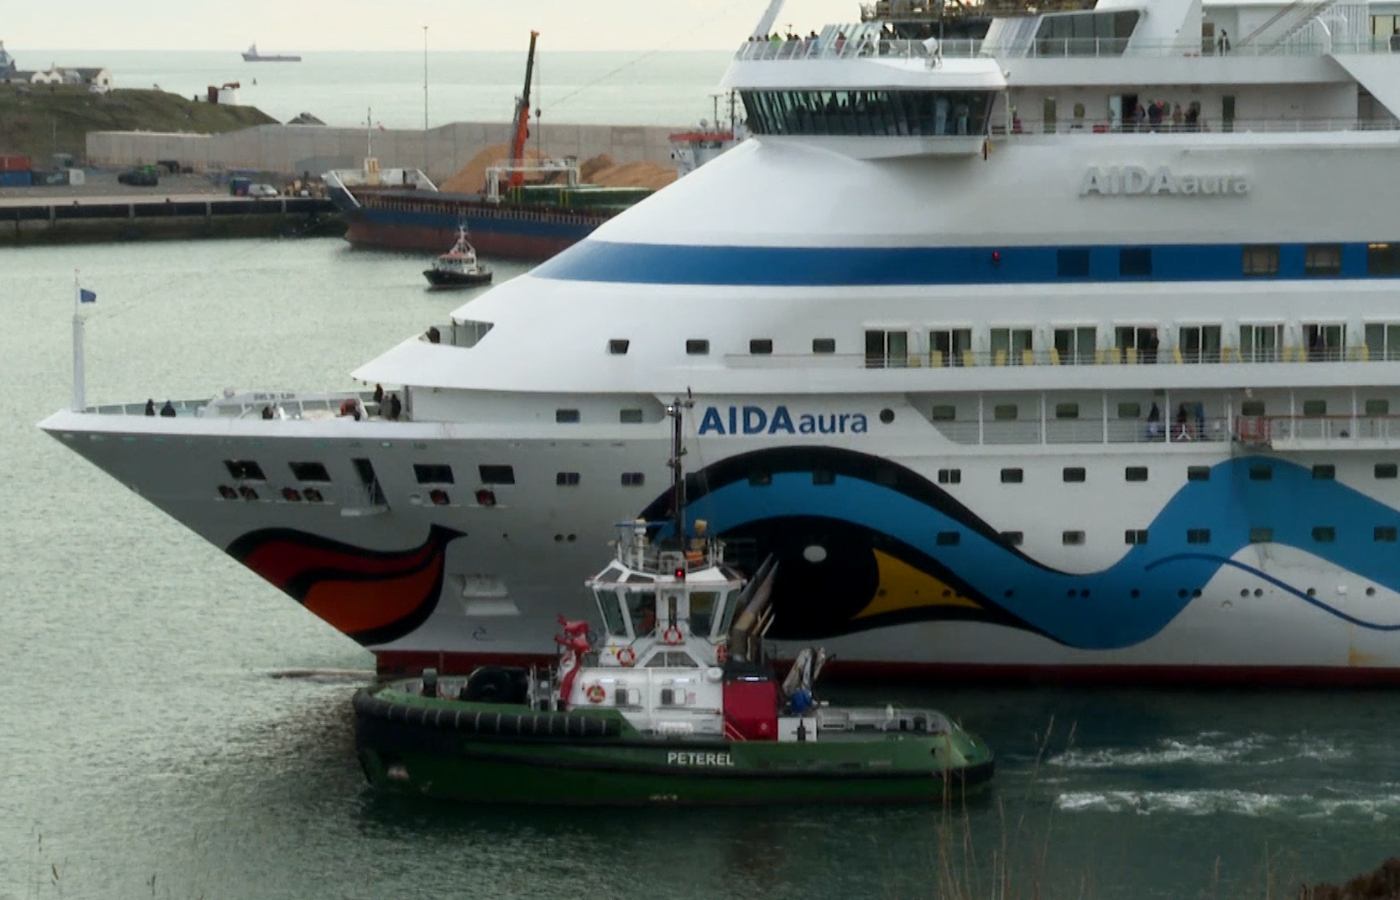 AIDAaura is the longest vessel to visit the Port of Aberdeen to date.